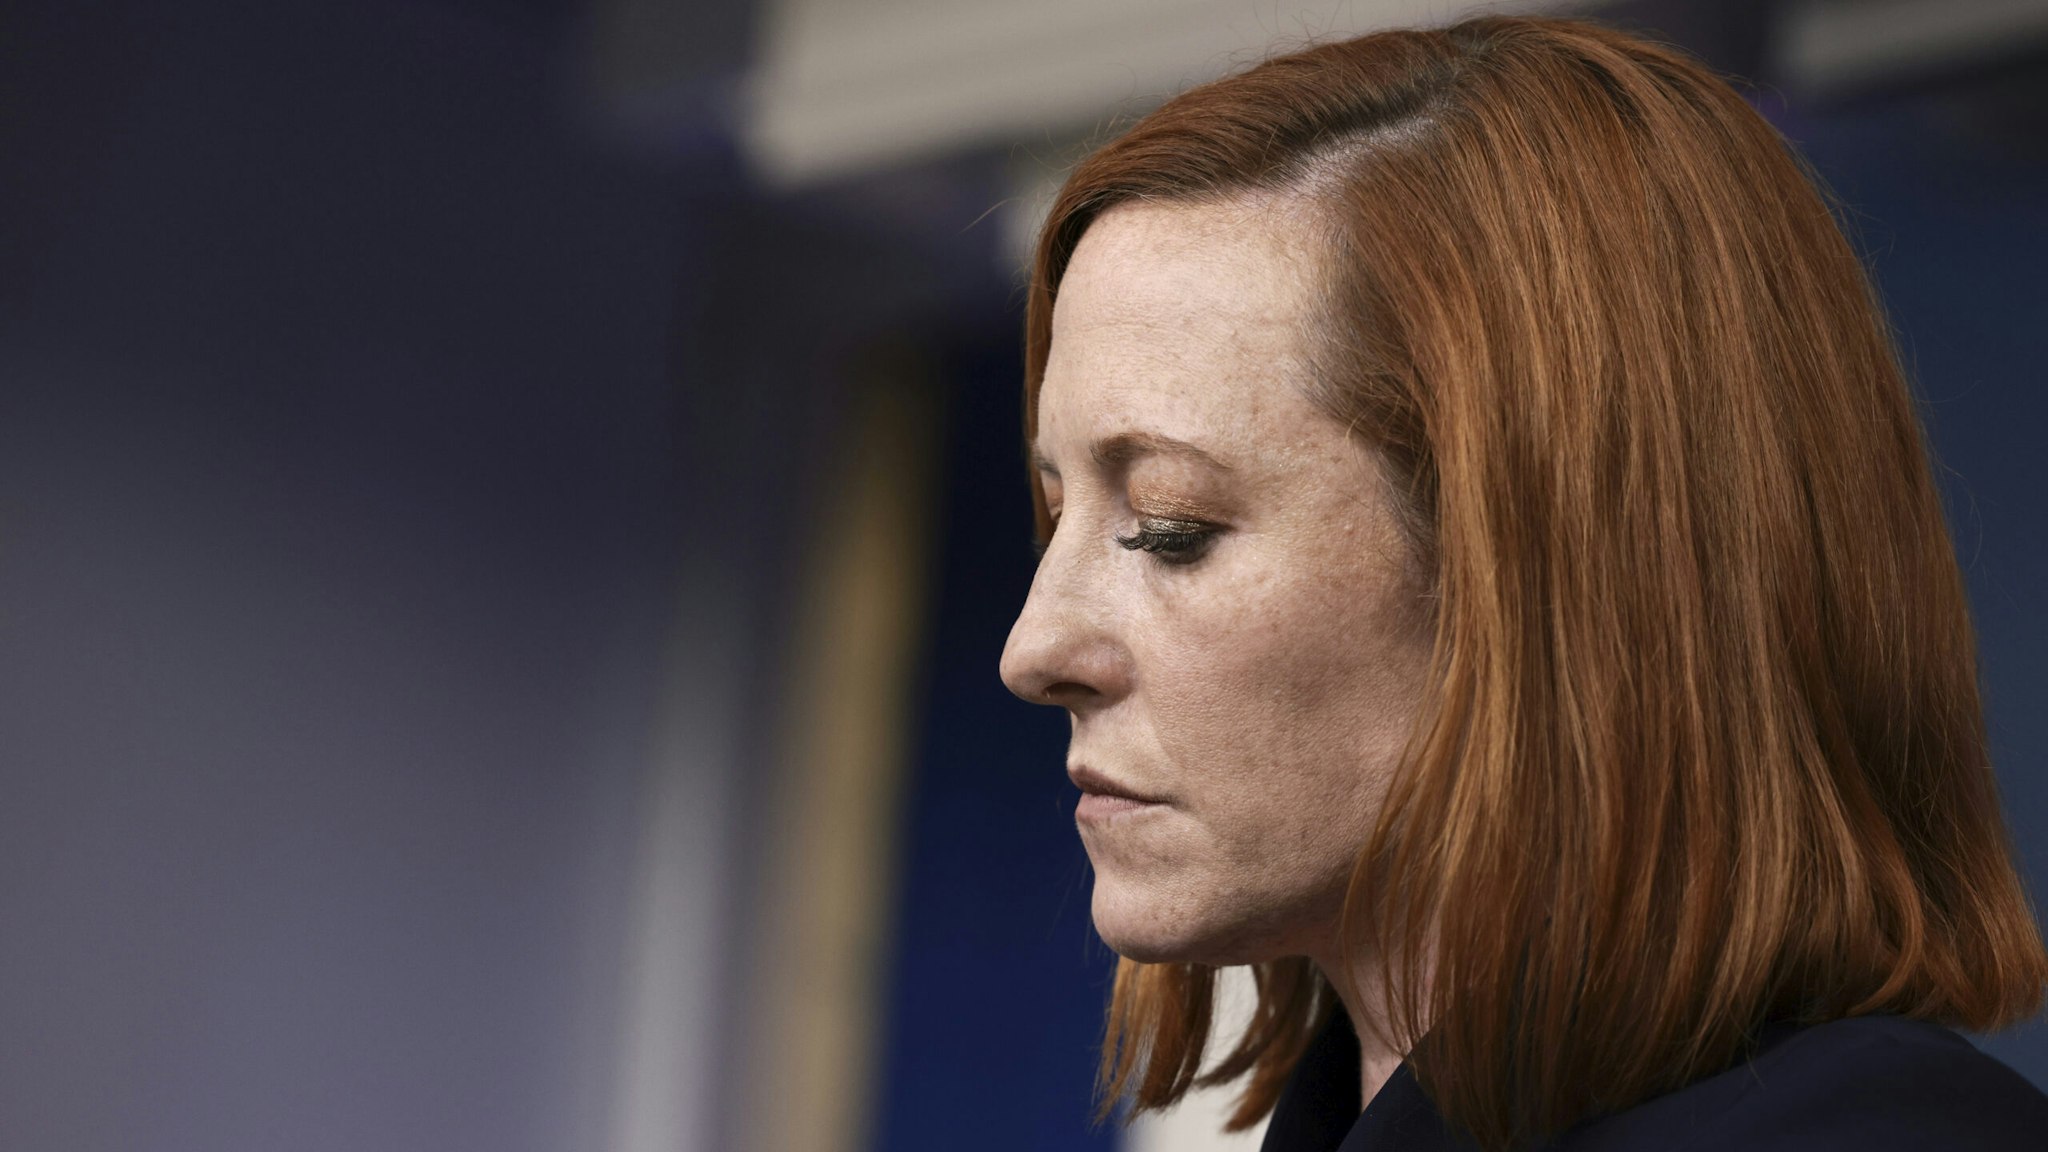 WASHINGTON, DC - SEPTEMBER 24: White House Press Secretary Jen Psaki listens to a question at a press briefing in the White House on September 24, 2021 in Washington, DC. Psaki spoke on a range of topics including the Covid-19 vaccines and the U.S and Mexico border.